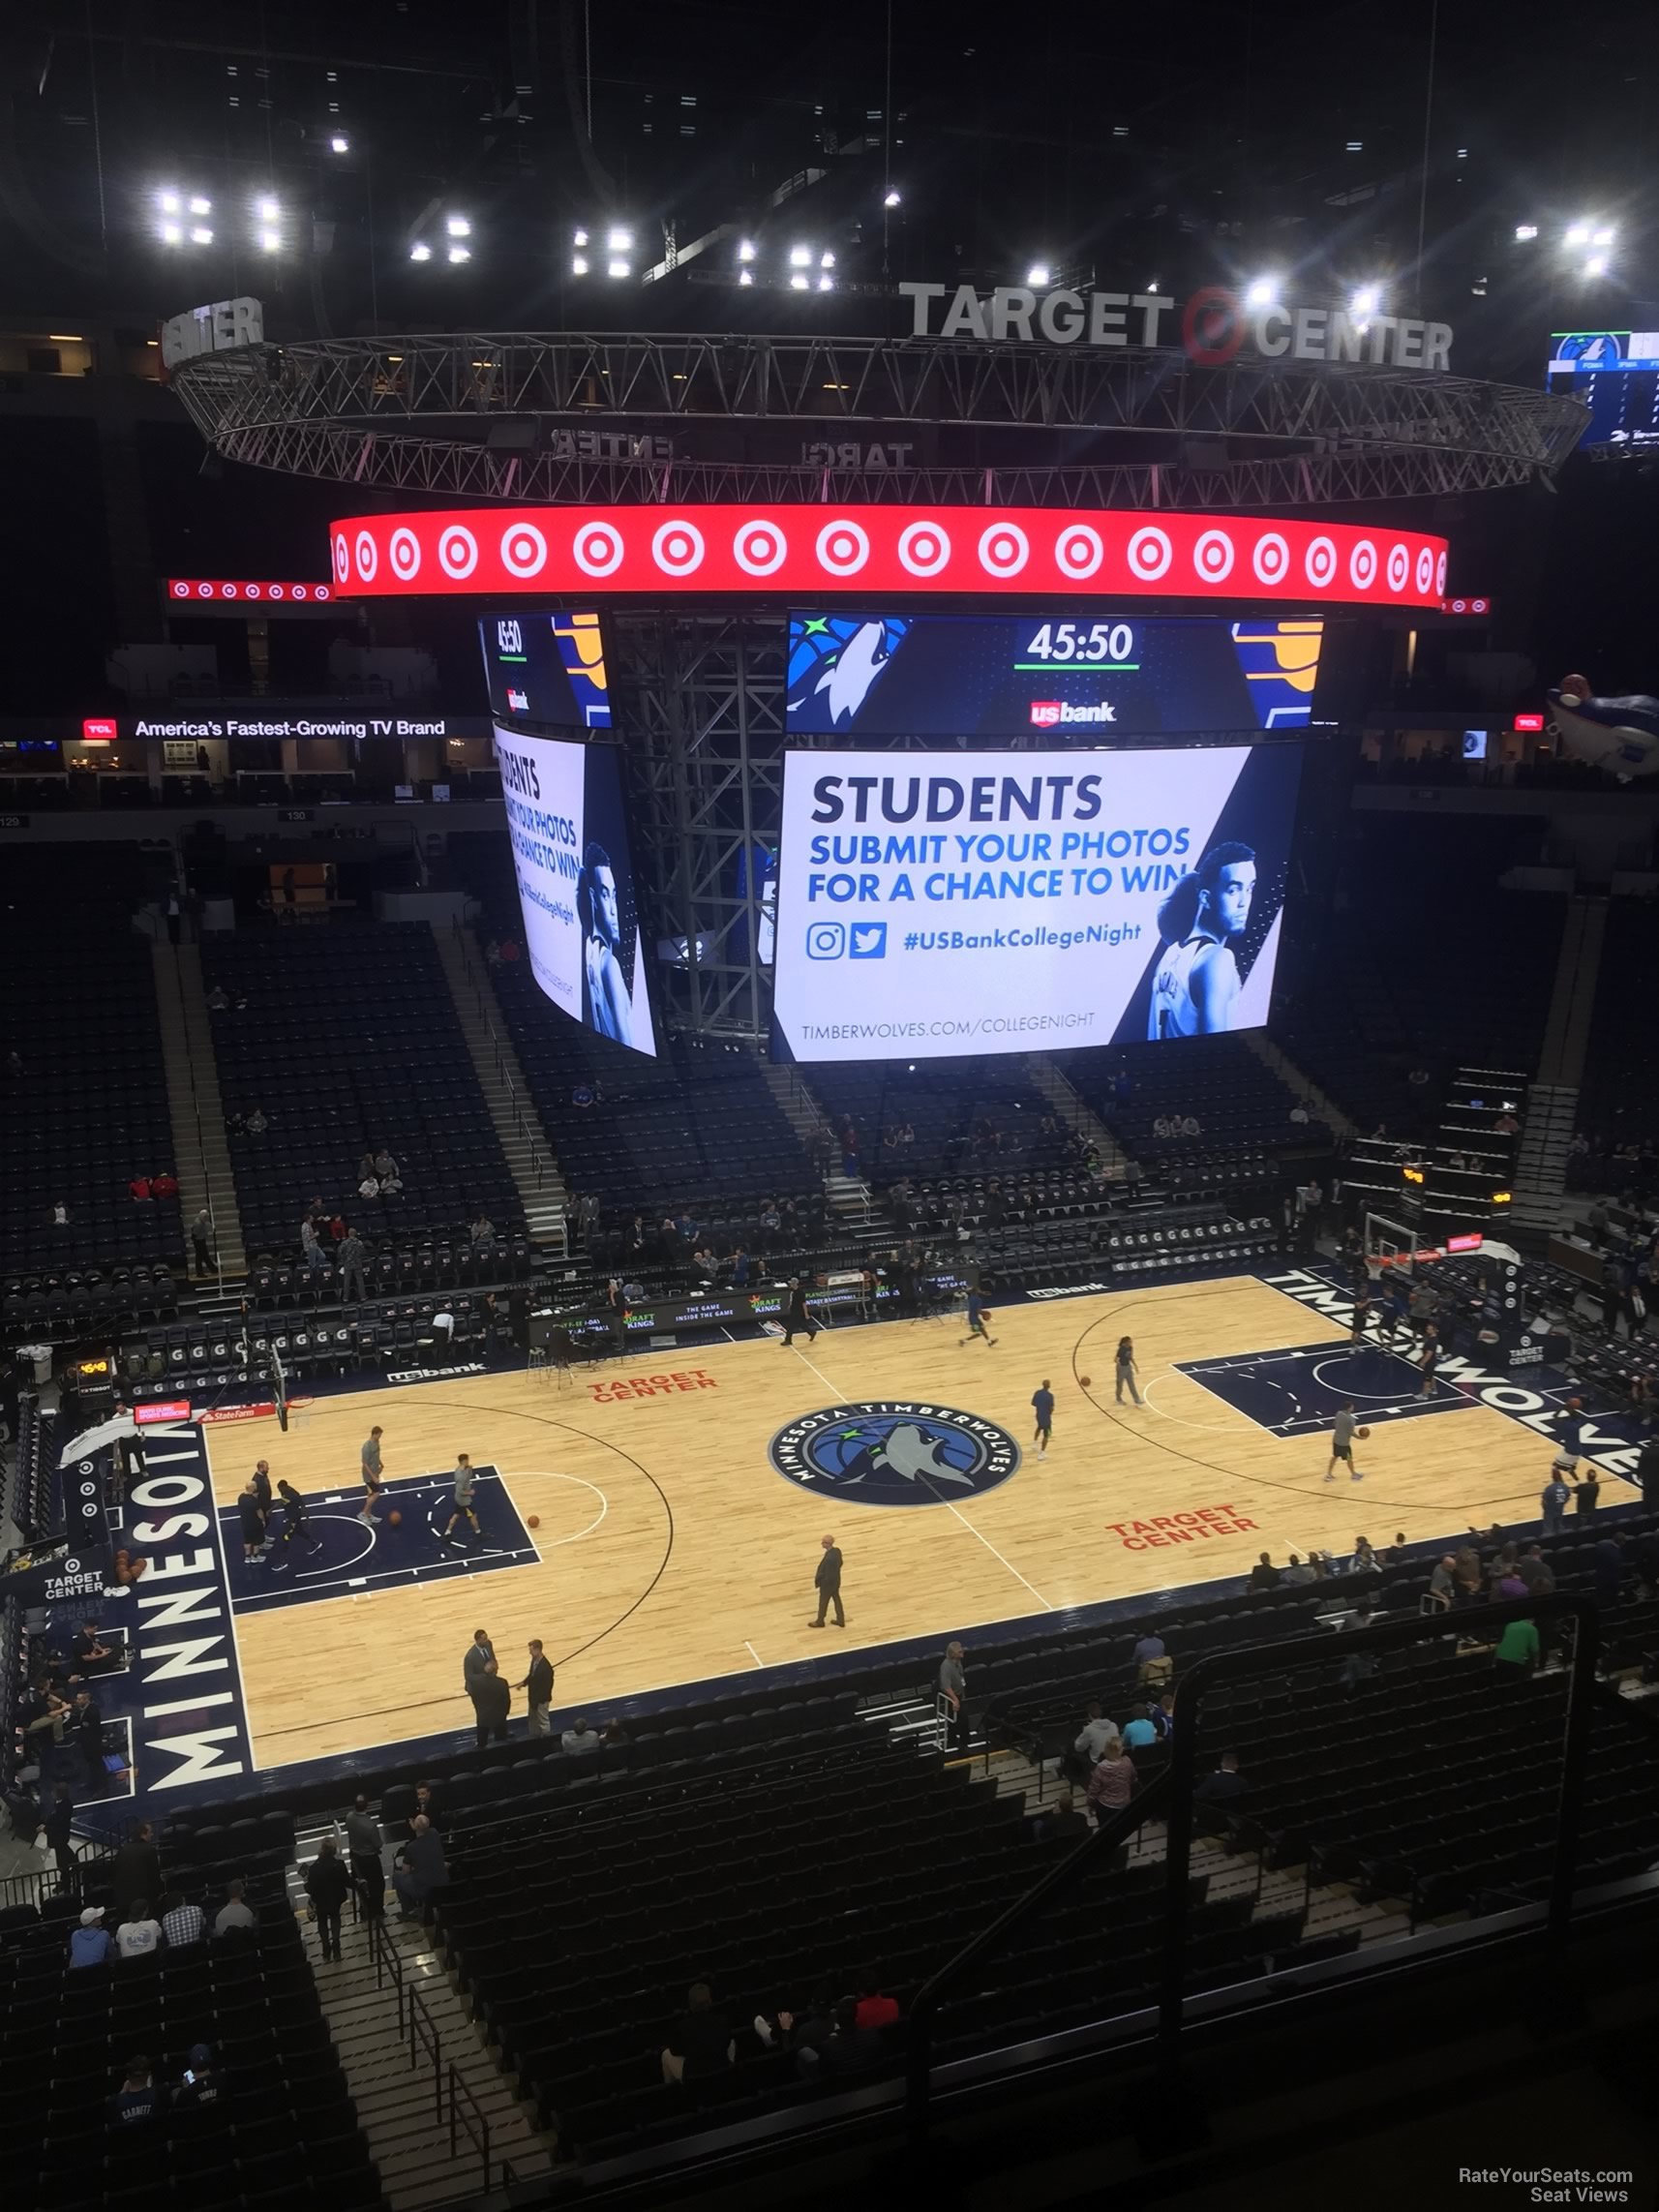 section 214, row d seat view  for basketball - target center